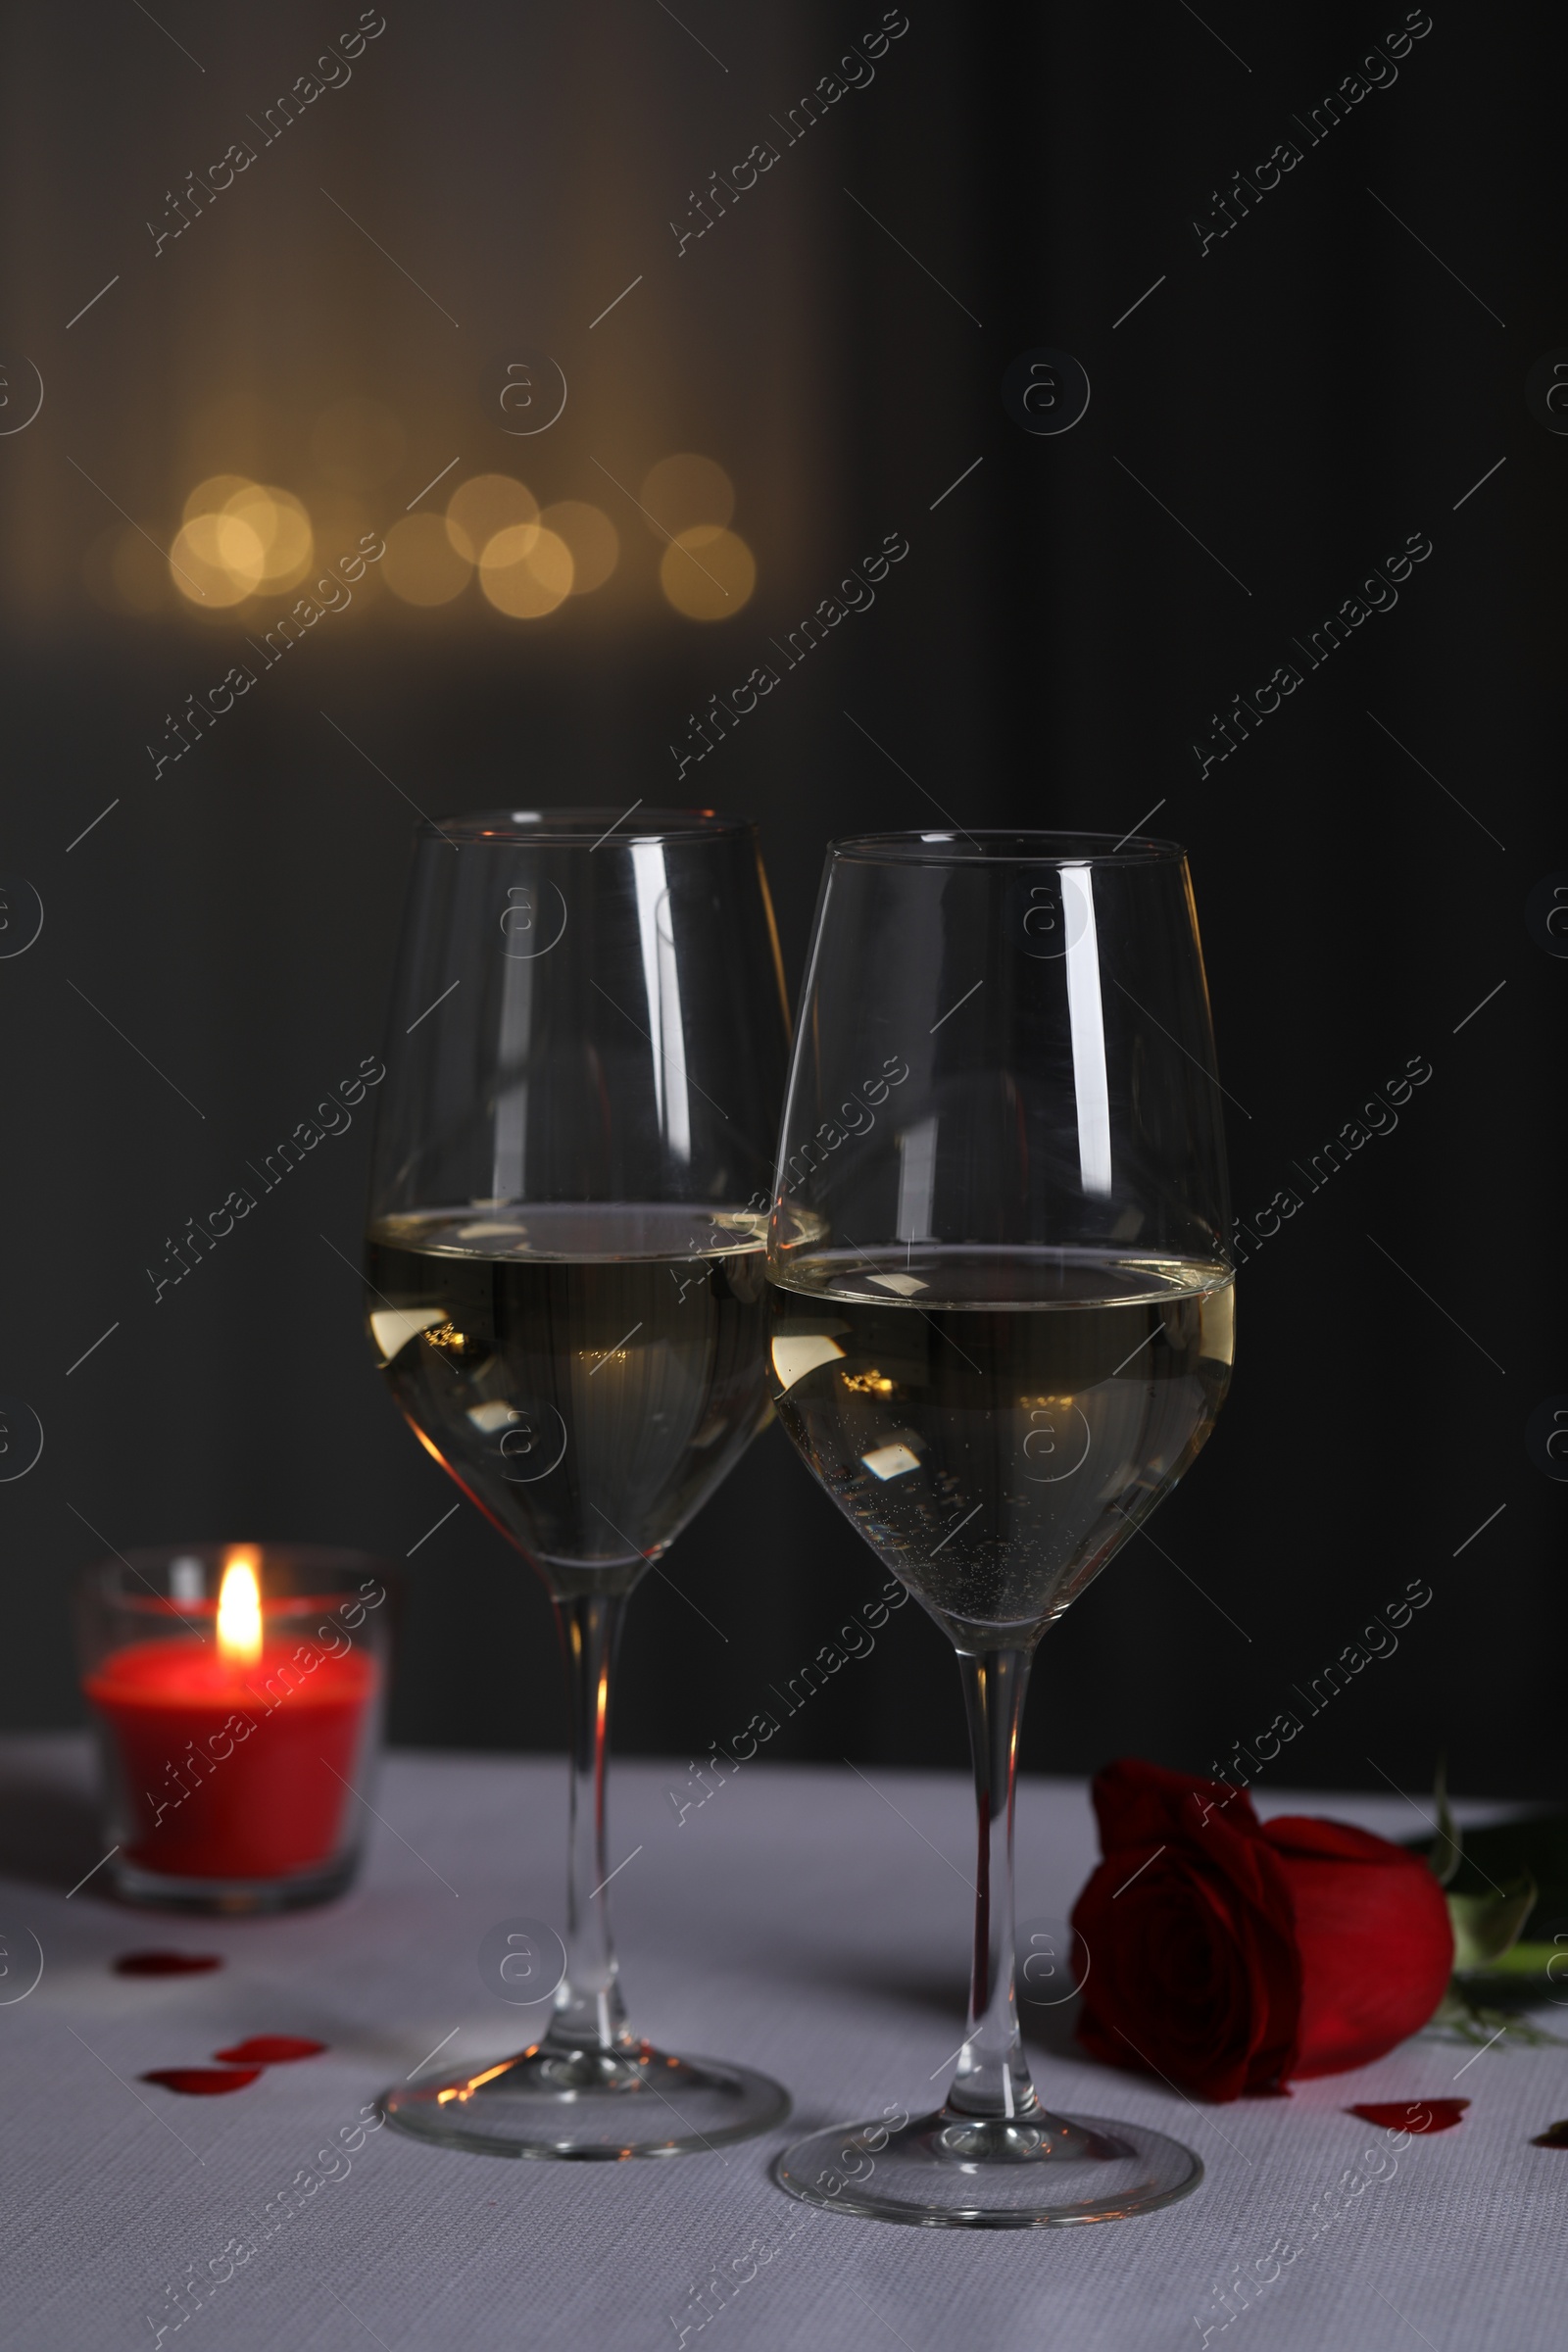 Photo of Glasses of white wine, burning candle and rose flower on grey table against blurred lights. Romantic atmosphere